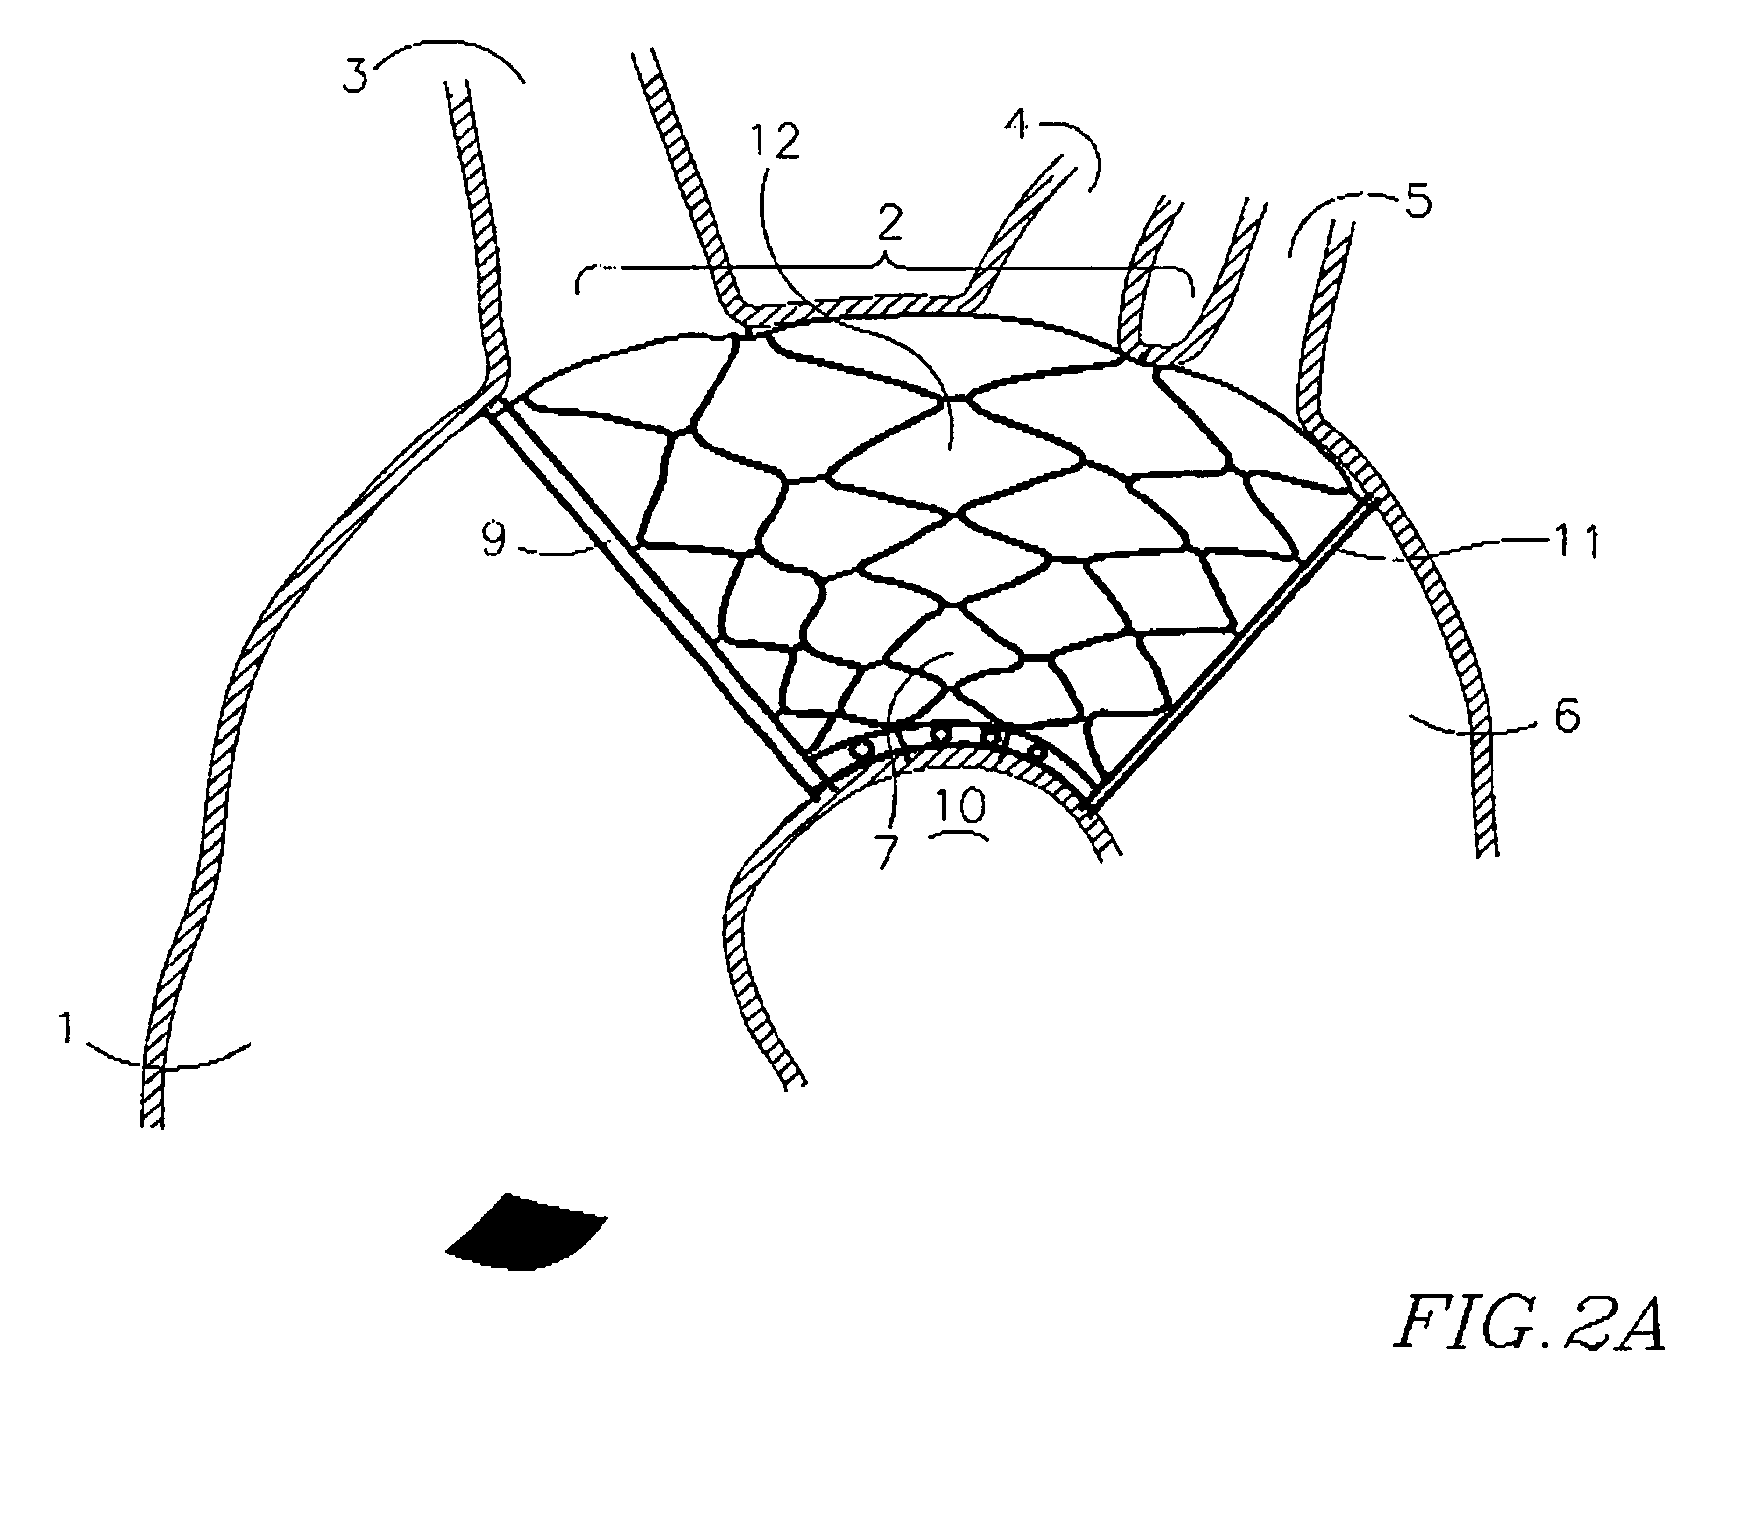 Endovascular device for entrapment of particulate matter and method for use